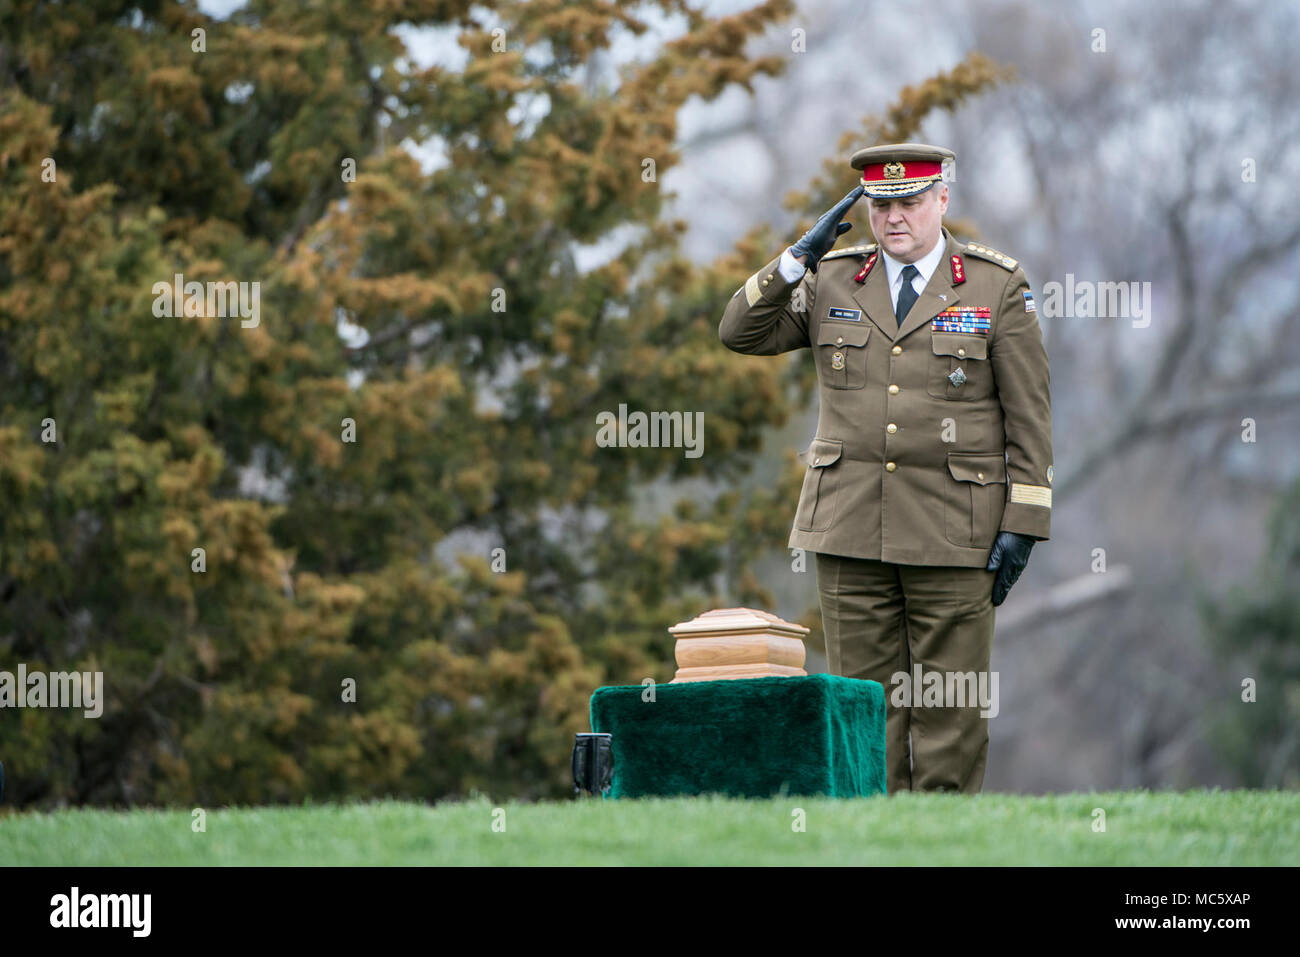 Estonian Gen. Riho Terras, Commander of the Estonian Defence Forces, renders honors during the full honors funeral of U.S. Army Col. and Estonian Gen. Aleksander Einseln in Section 34 of Arlington National Cemetery, Arlington, Virginia, April 2, 2018.  Born in Estonia, Einseln immigrated to the United States in 1949 and enrolled in the U.S. Army in 1950 at the outbreak of the Korean War. He served with Special Forces in the Vietnam War and retiring as a Colonel in 1985. In 1993, Einseln returned to Estonia at the request of Estonian President Lennart Meri to serve as the first commander of the Stock Photo